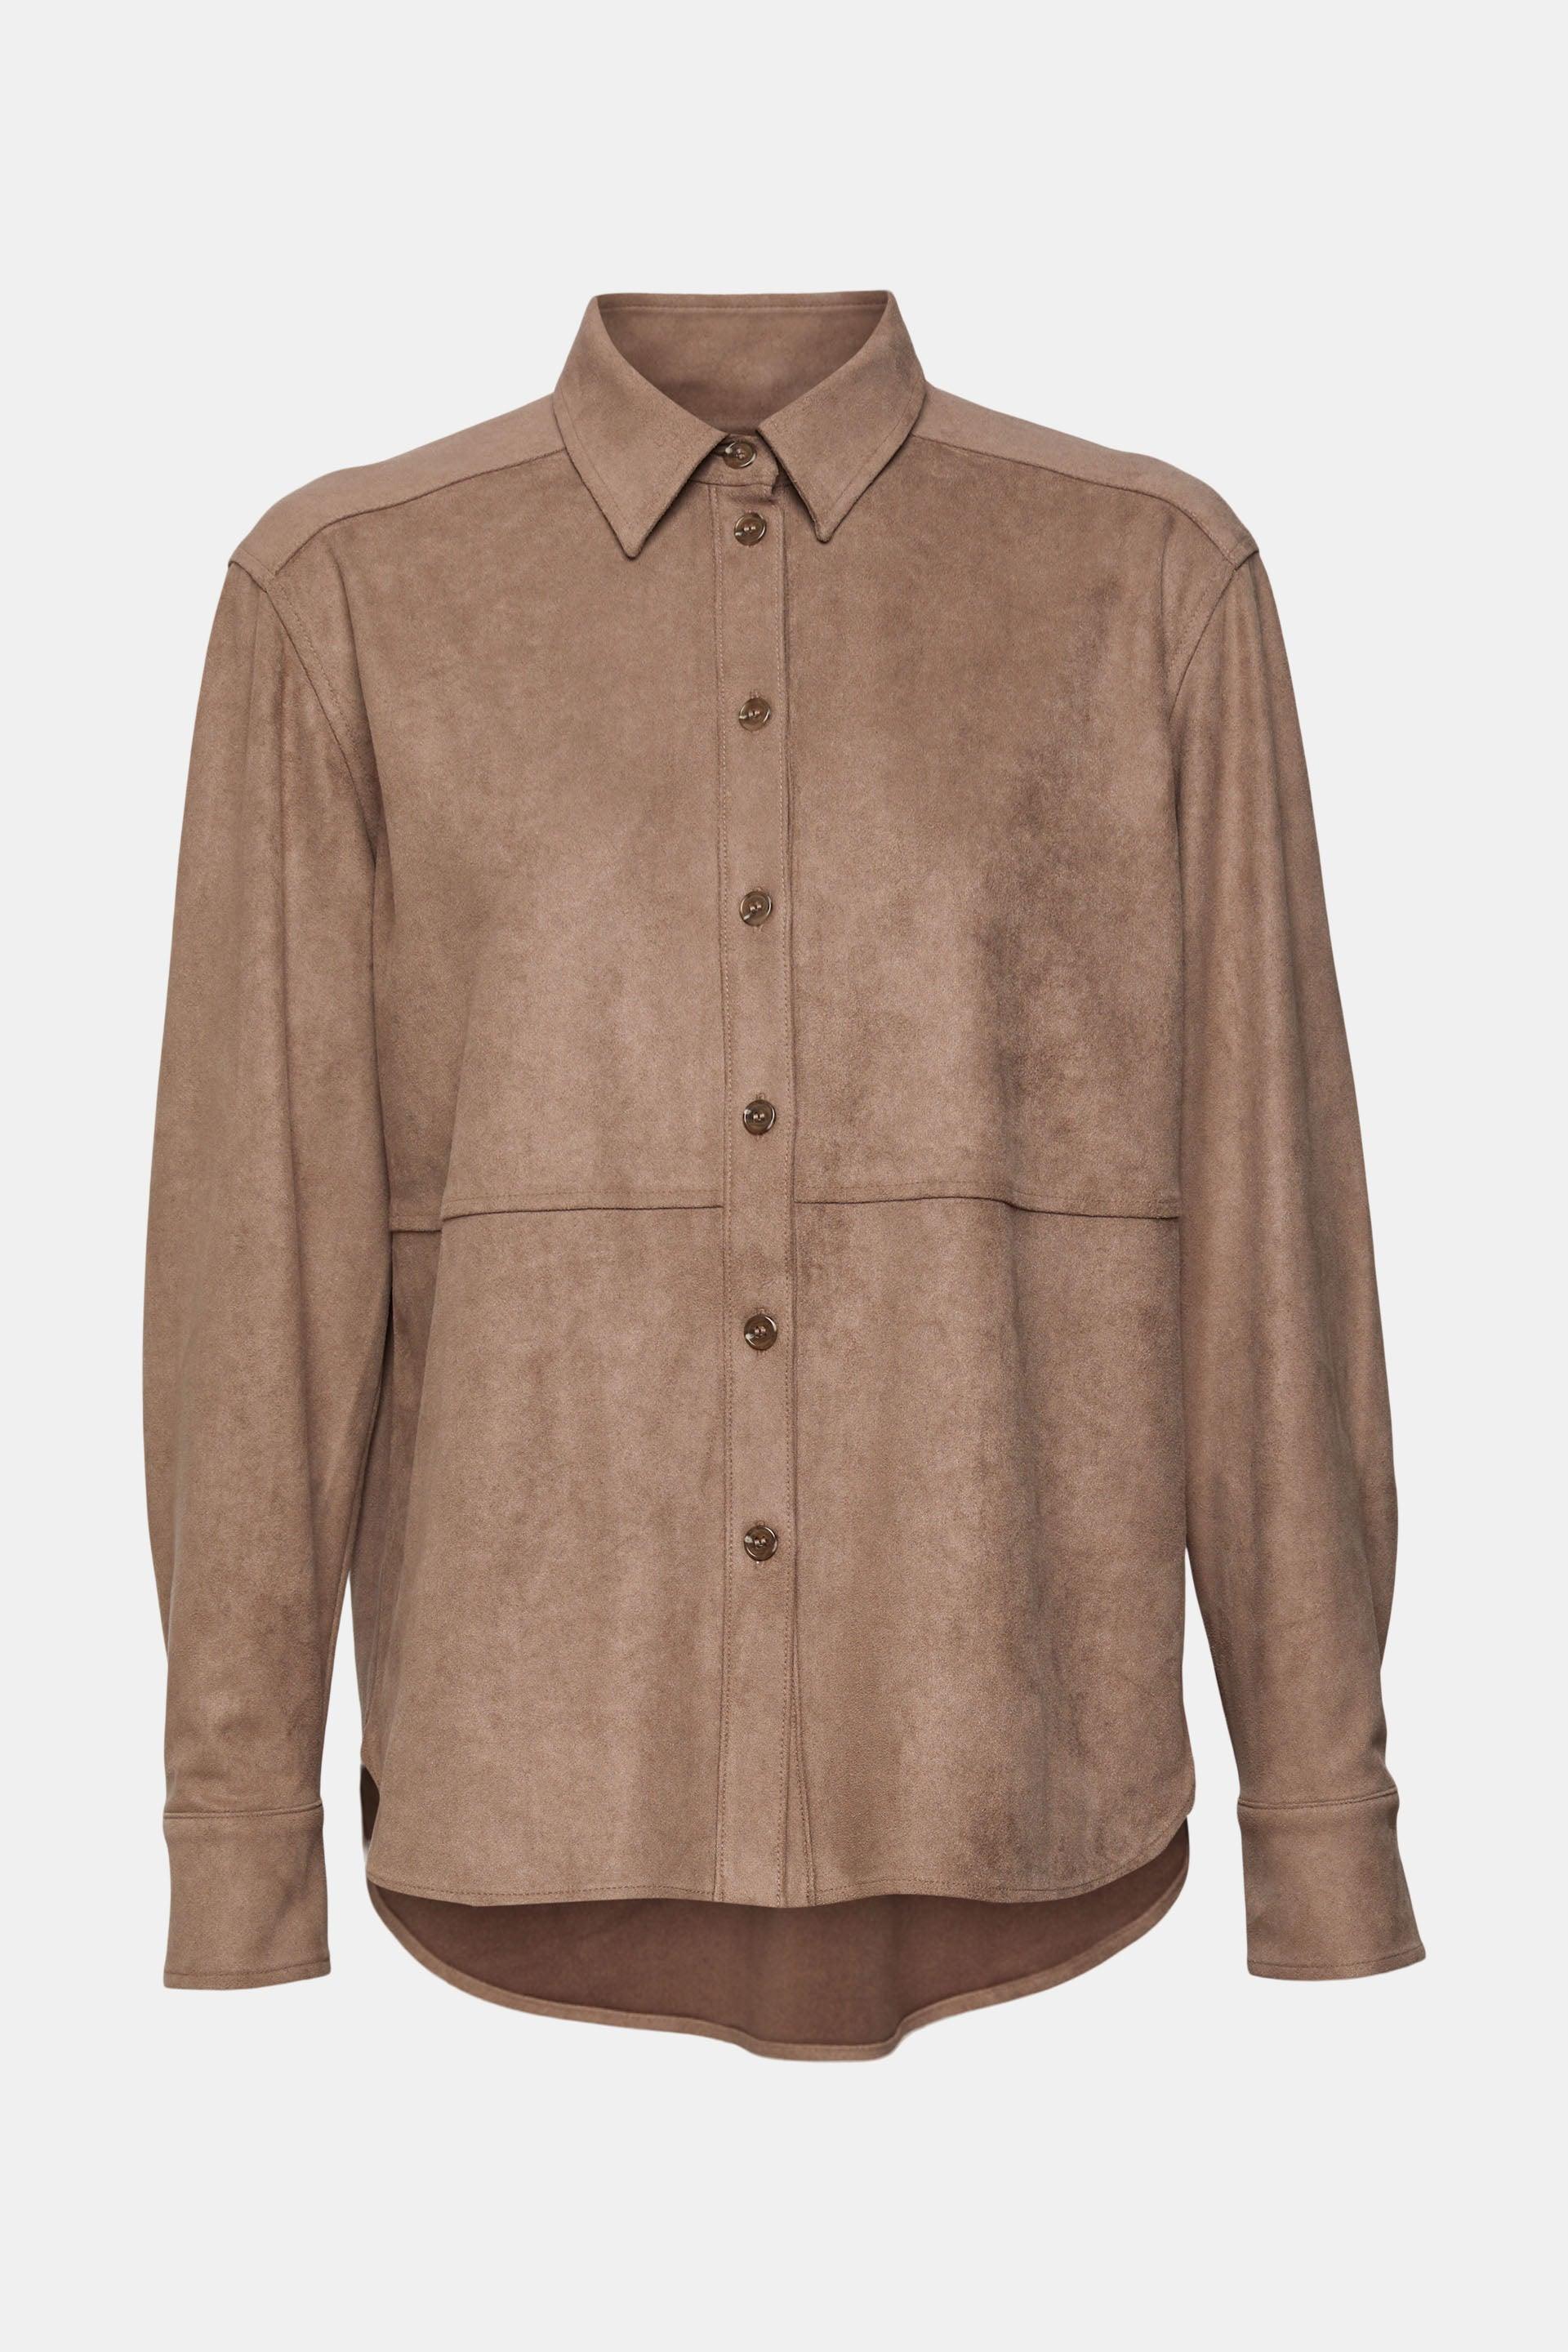 Faux Suede Blouse Taupe